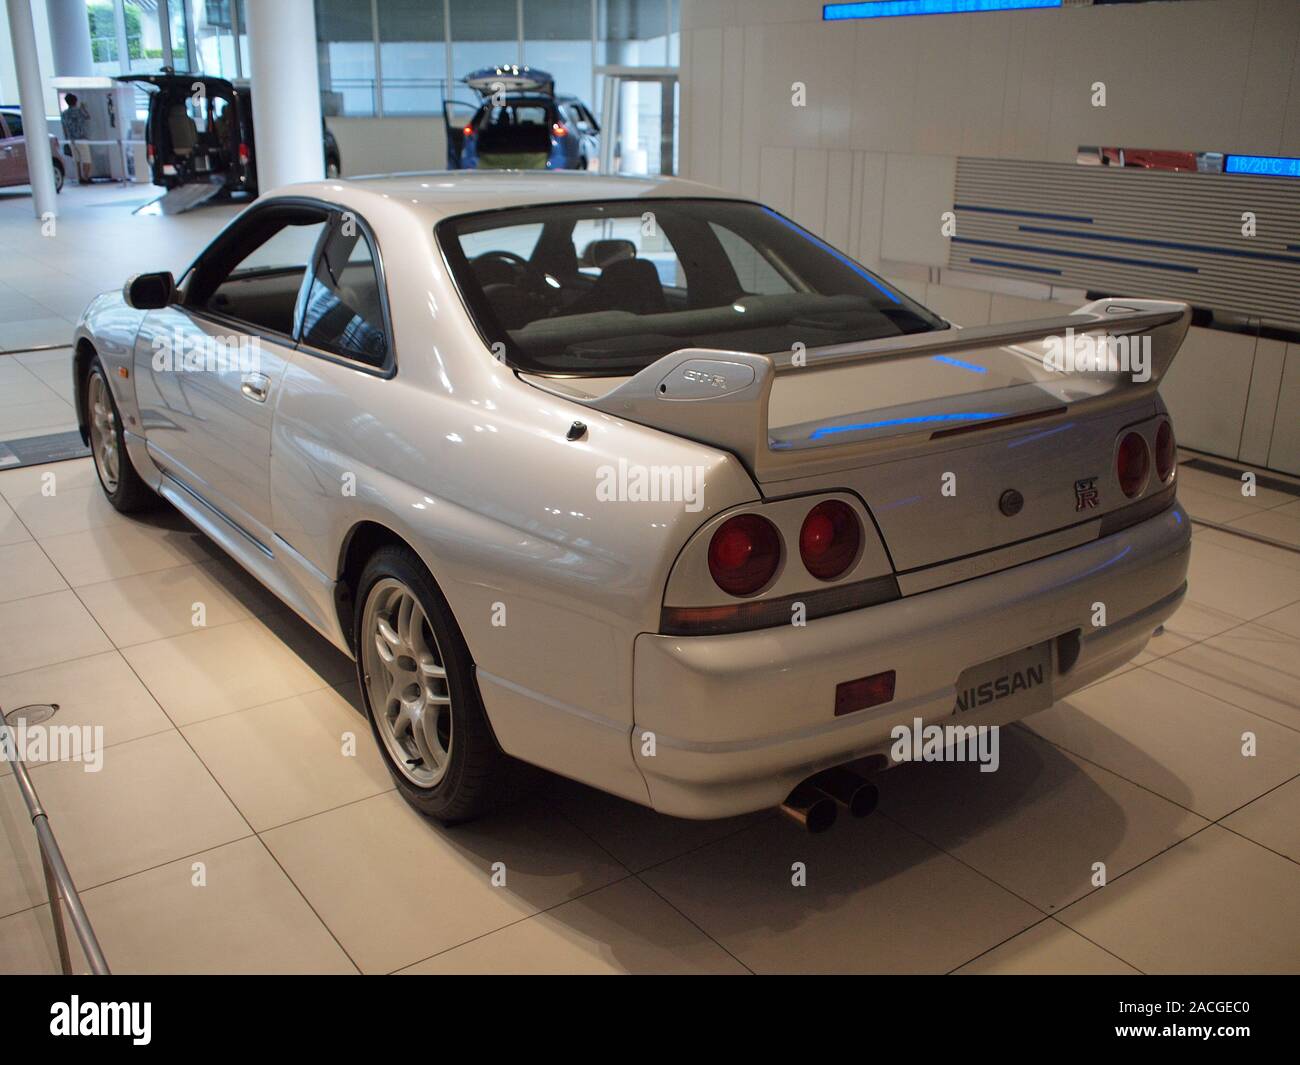 1994 Nissan Skyline GT-R Nürburgring Time Attack at the Nissan Global  Headquarters Gallery in Yokohama Stock Photo - Alamy